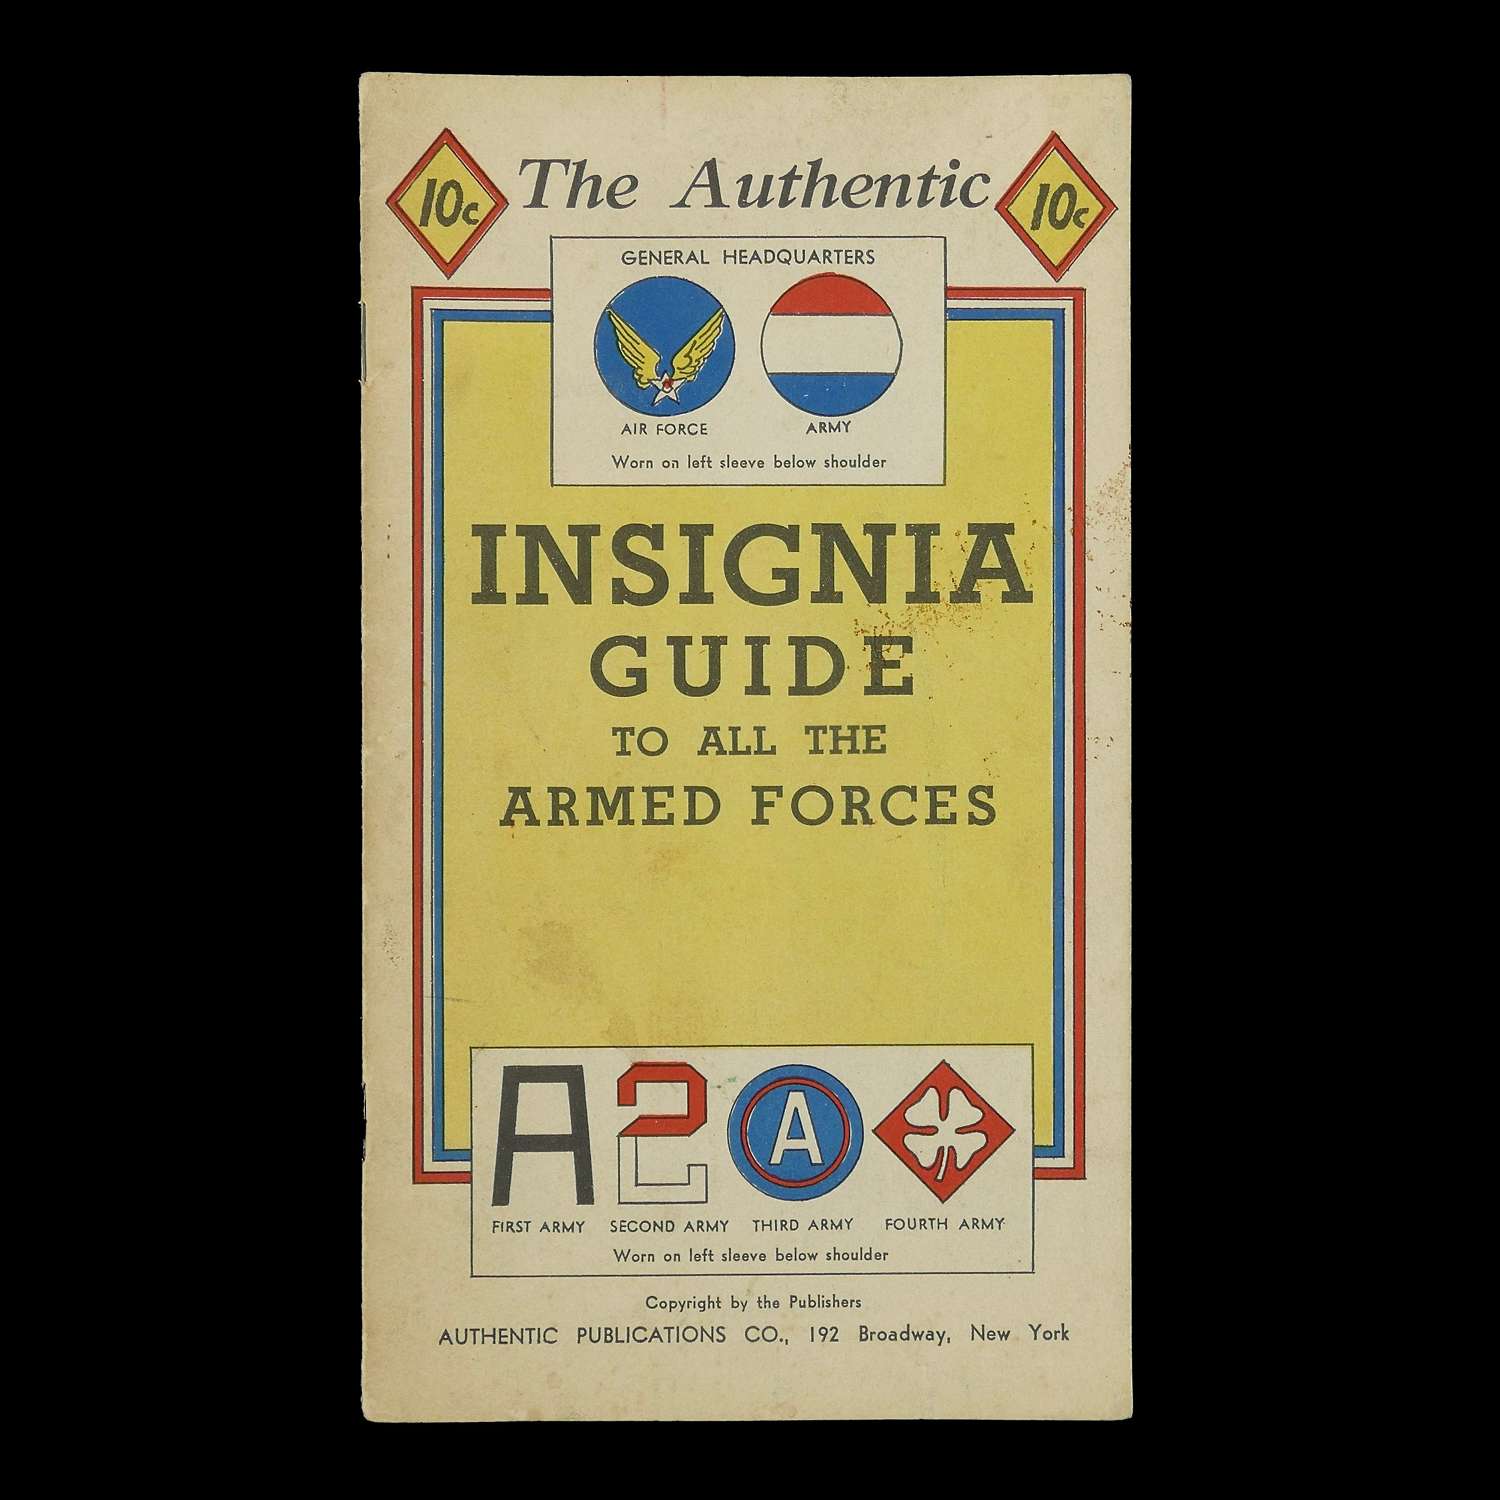 Insignia guide to all the armed forces